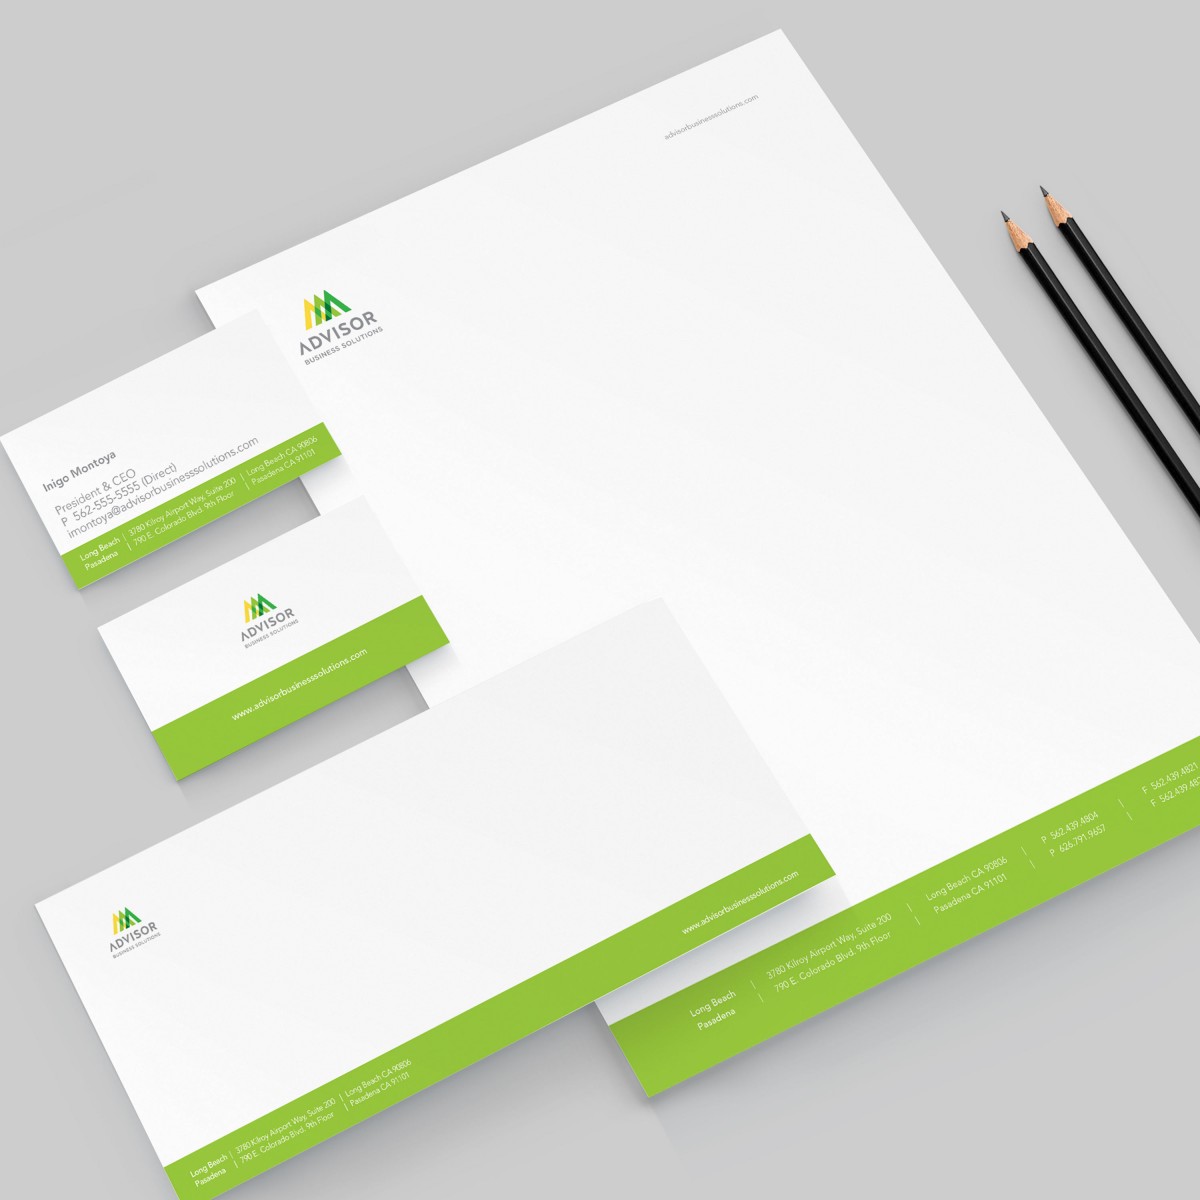 Advisor Business Solutions stationery system